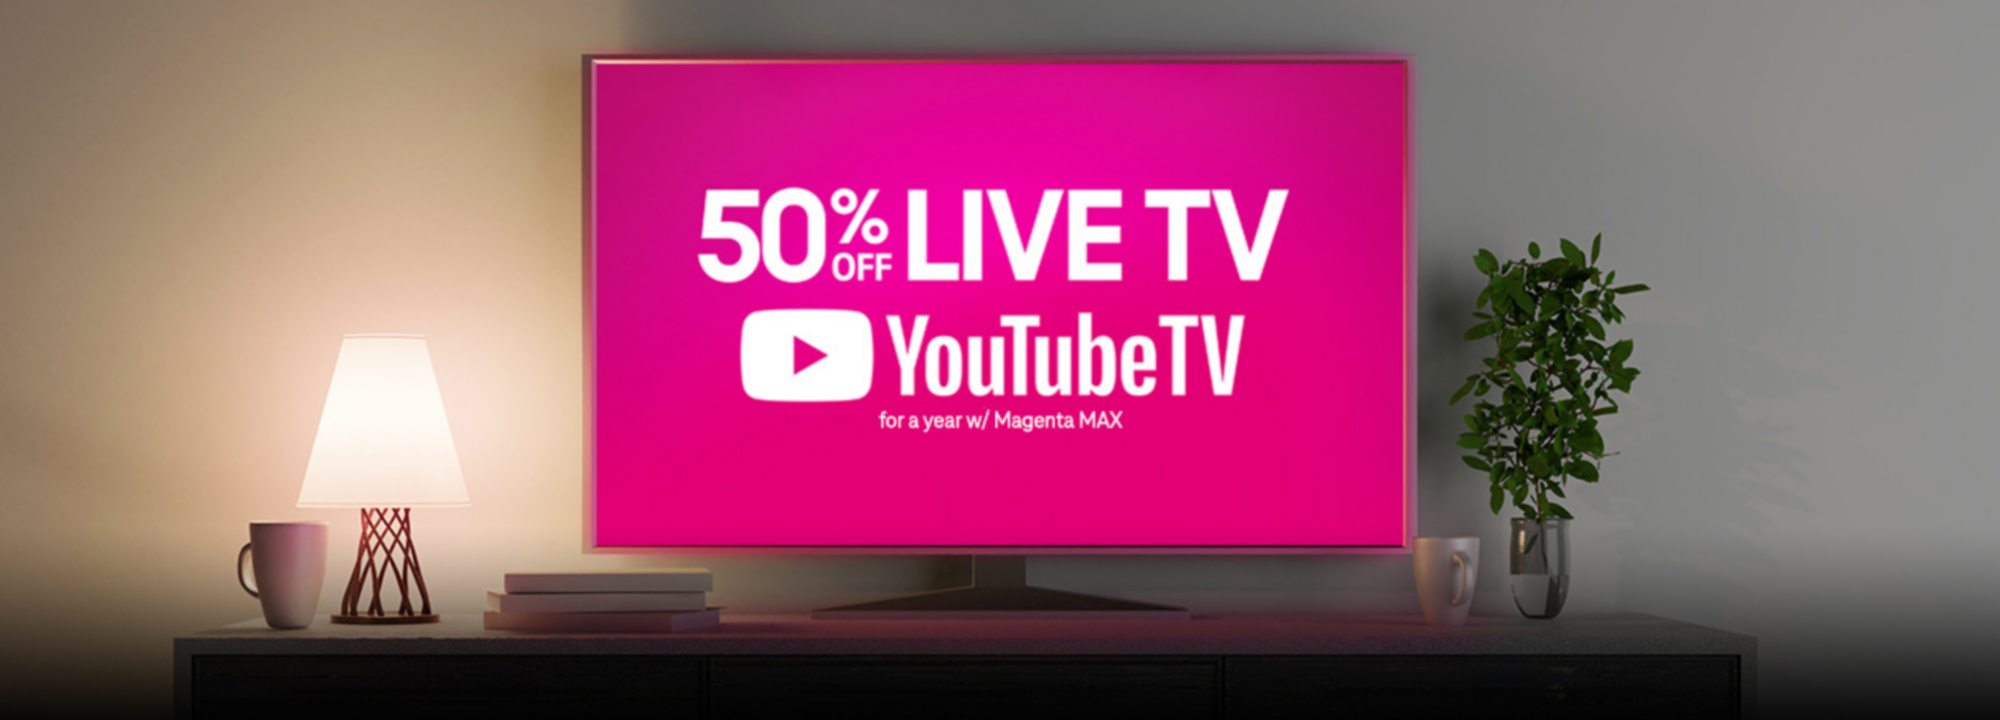 50% off LIVE TV. YouTubeTV for a year with Magenta Max